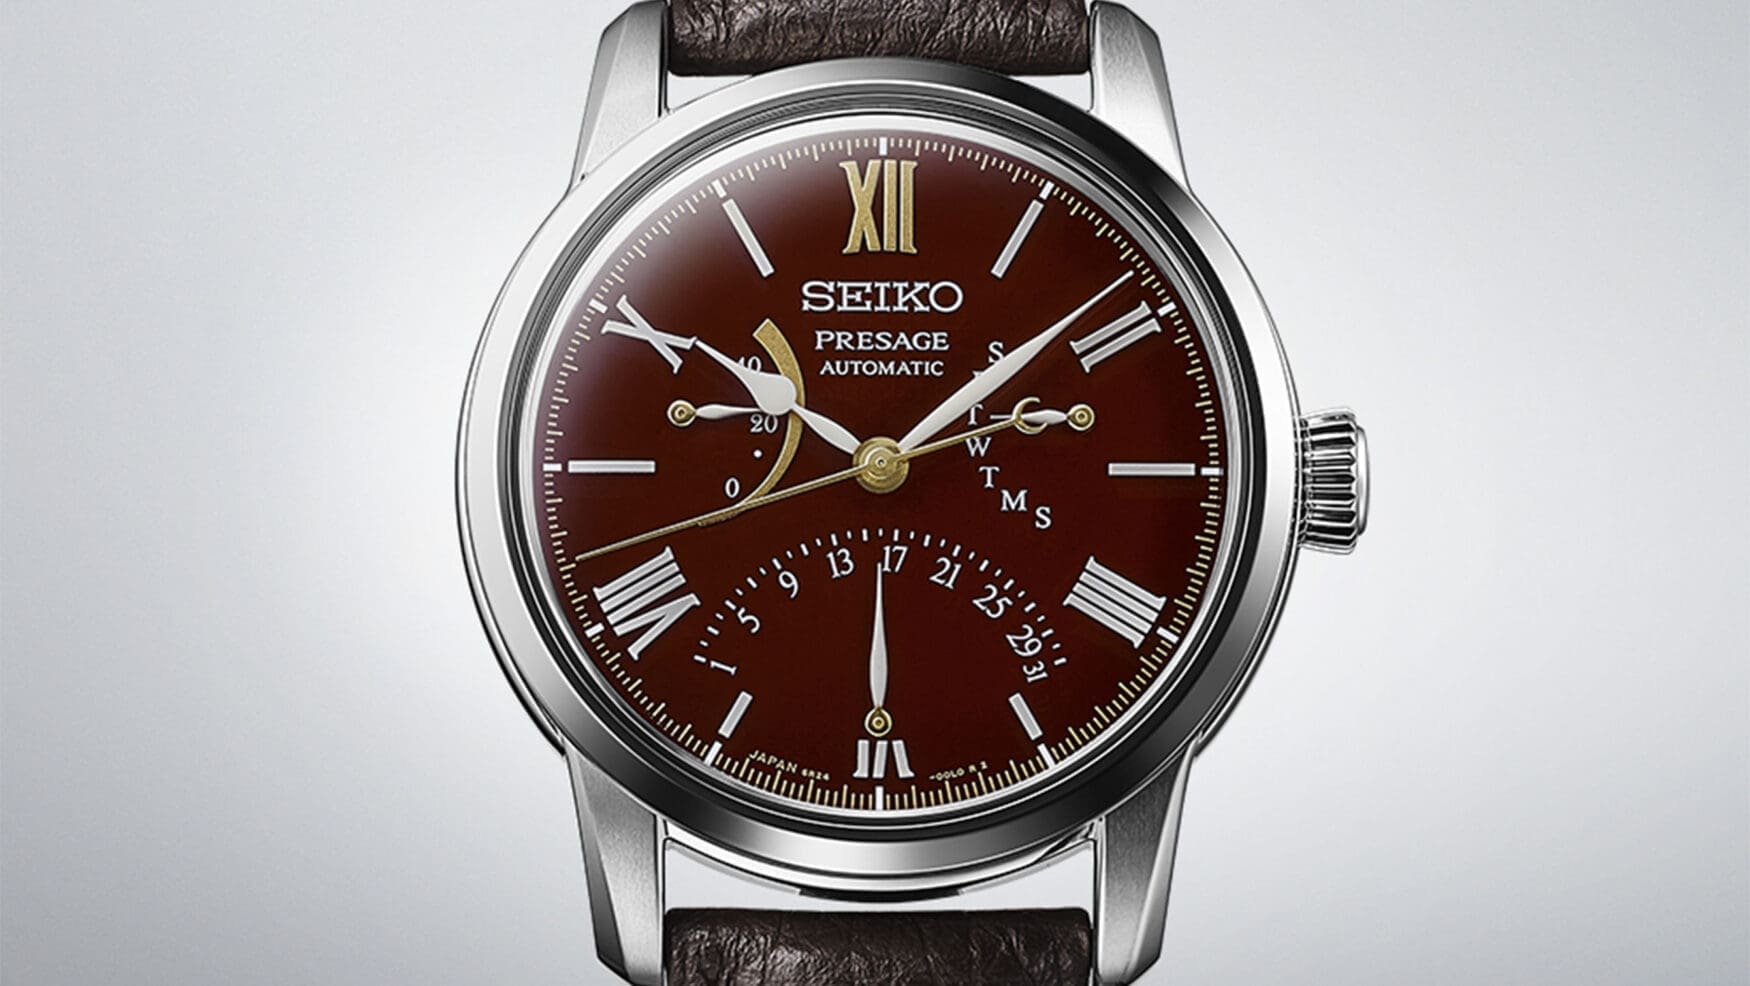 INTRODUCING: The Seiko Presage Craftsmanship Series delivers exquisite dials in porcelain, enamel and lacquer